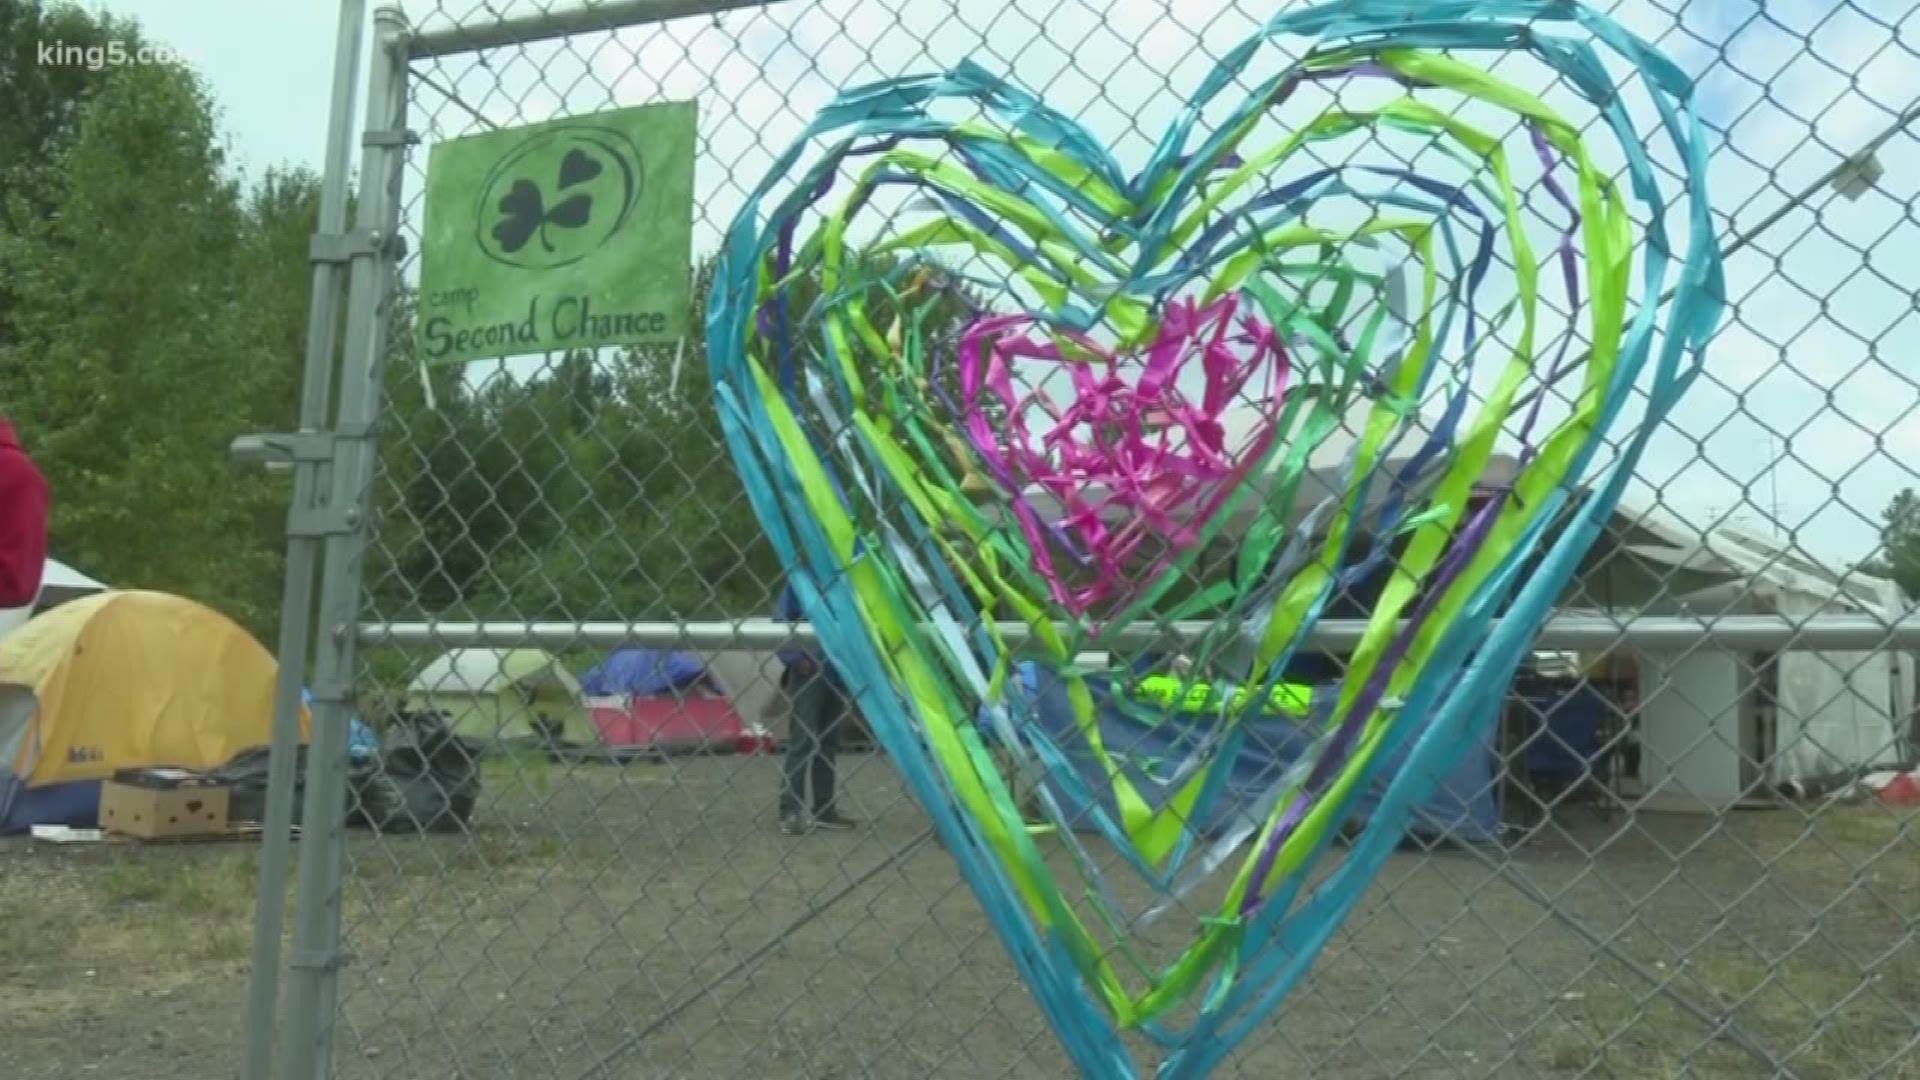 A local group focused on keeping Puget Sound clean, is asking for answers from Seattle about how the city plans to deal with an ever increasing homeless crisis. KING 5 Environmental Reporter Alison Morrow has more.